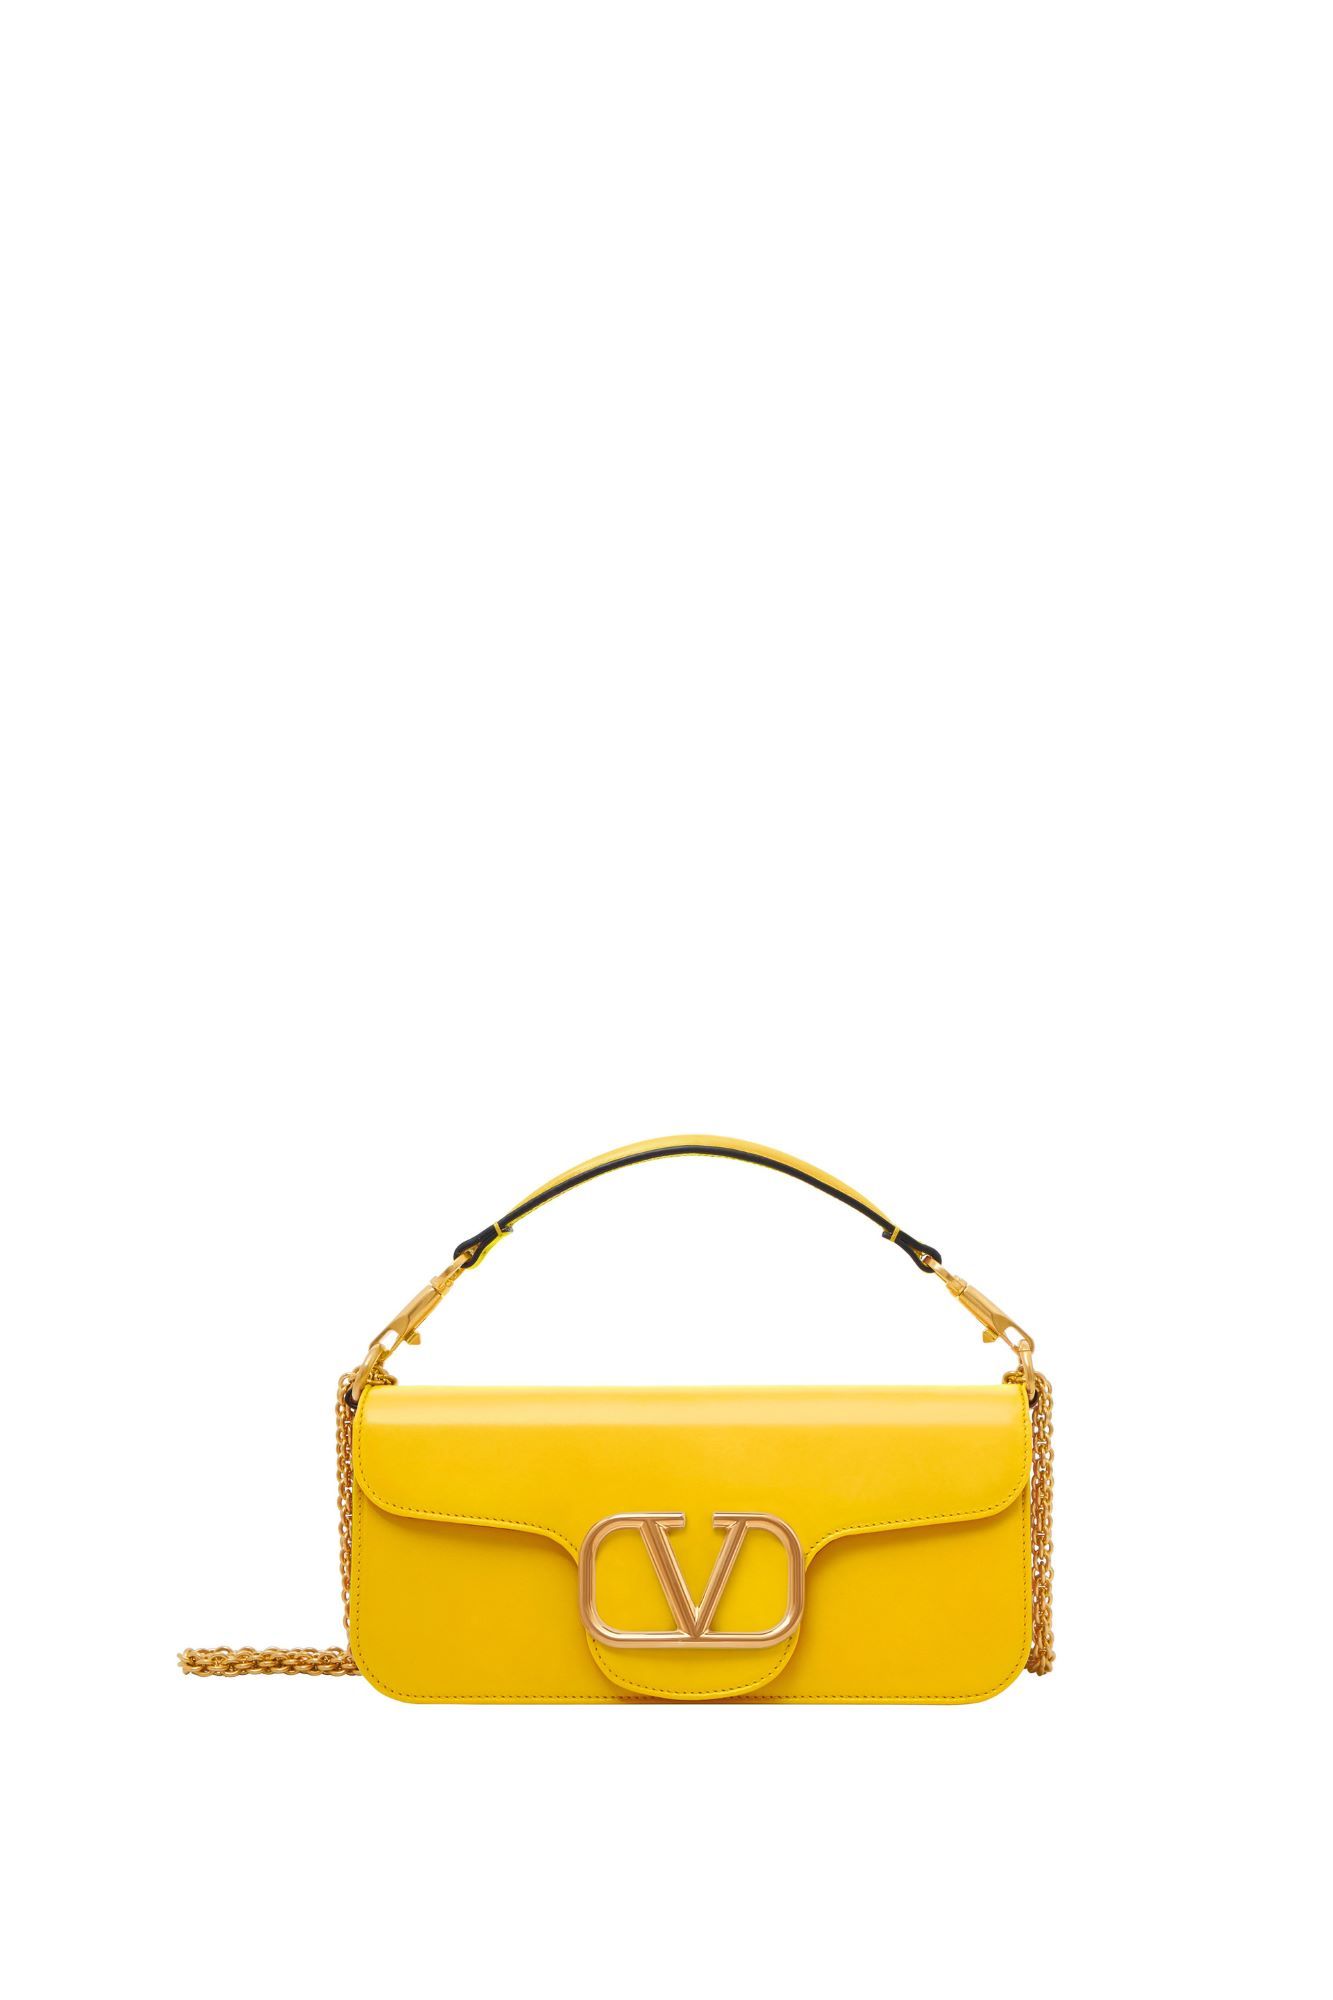 theceline bags that will make your summer brighter